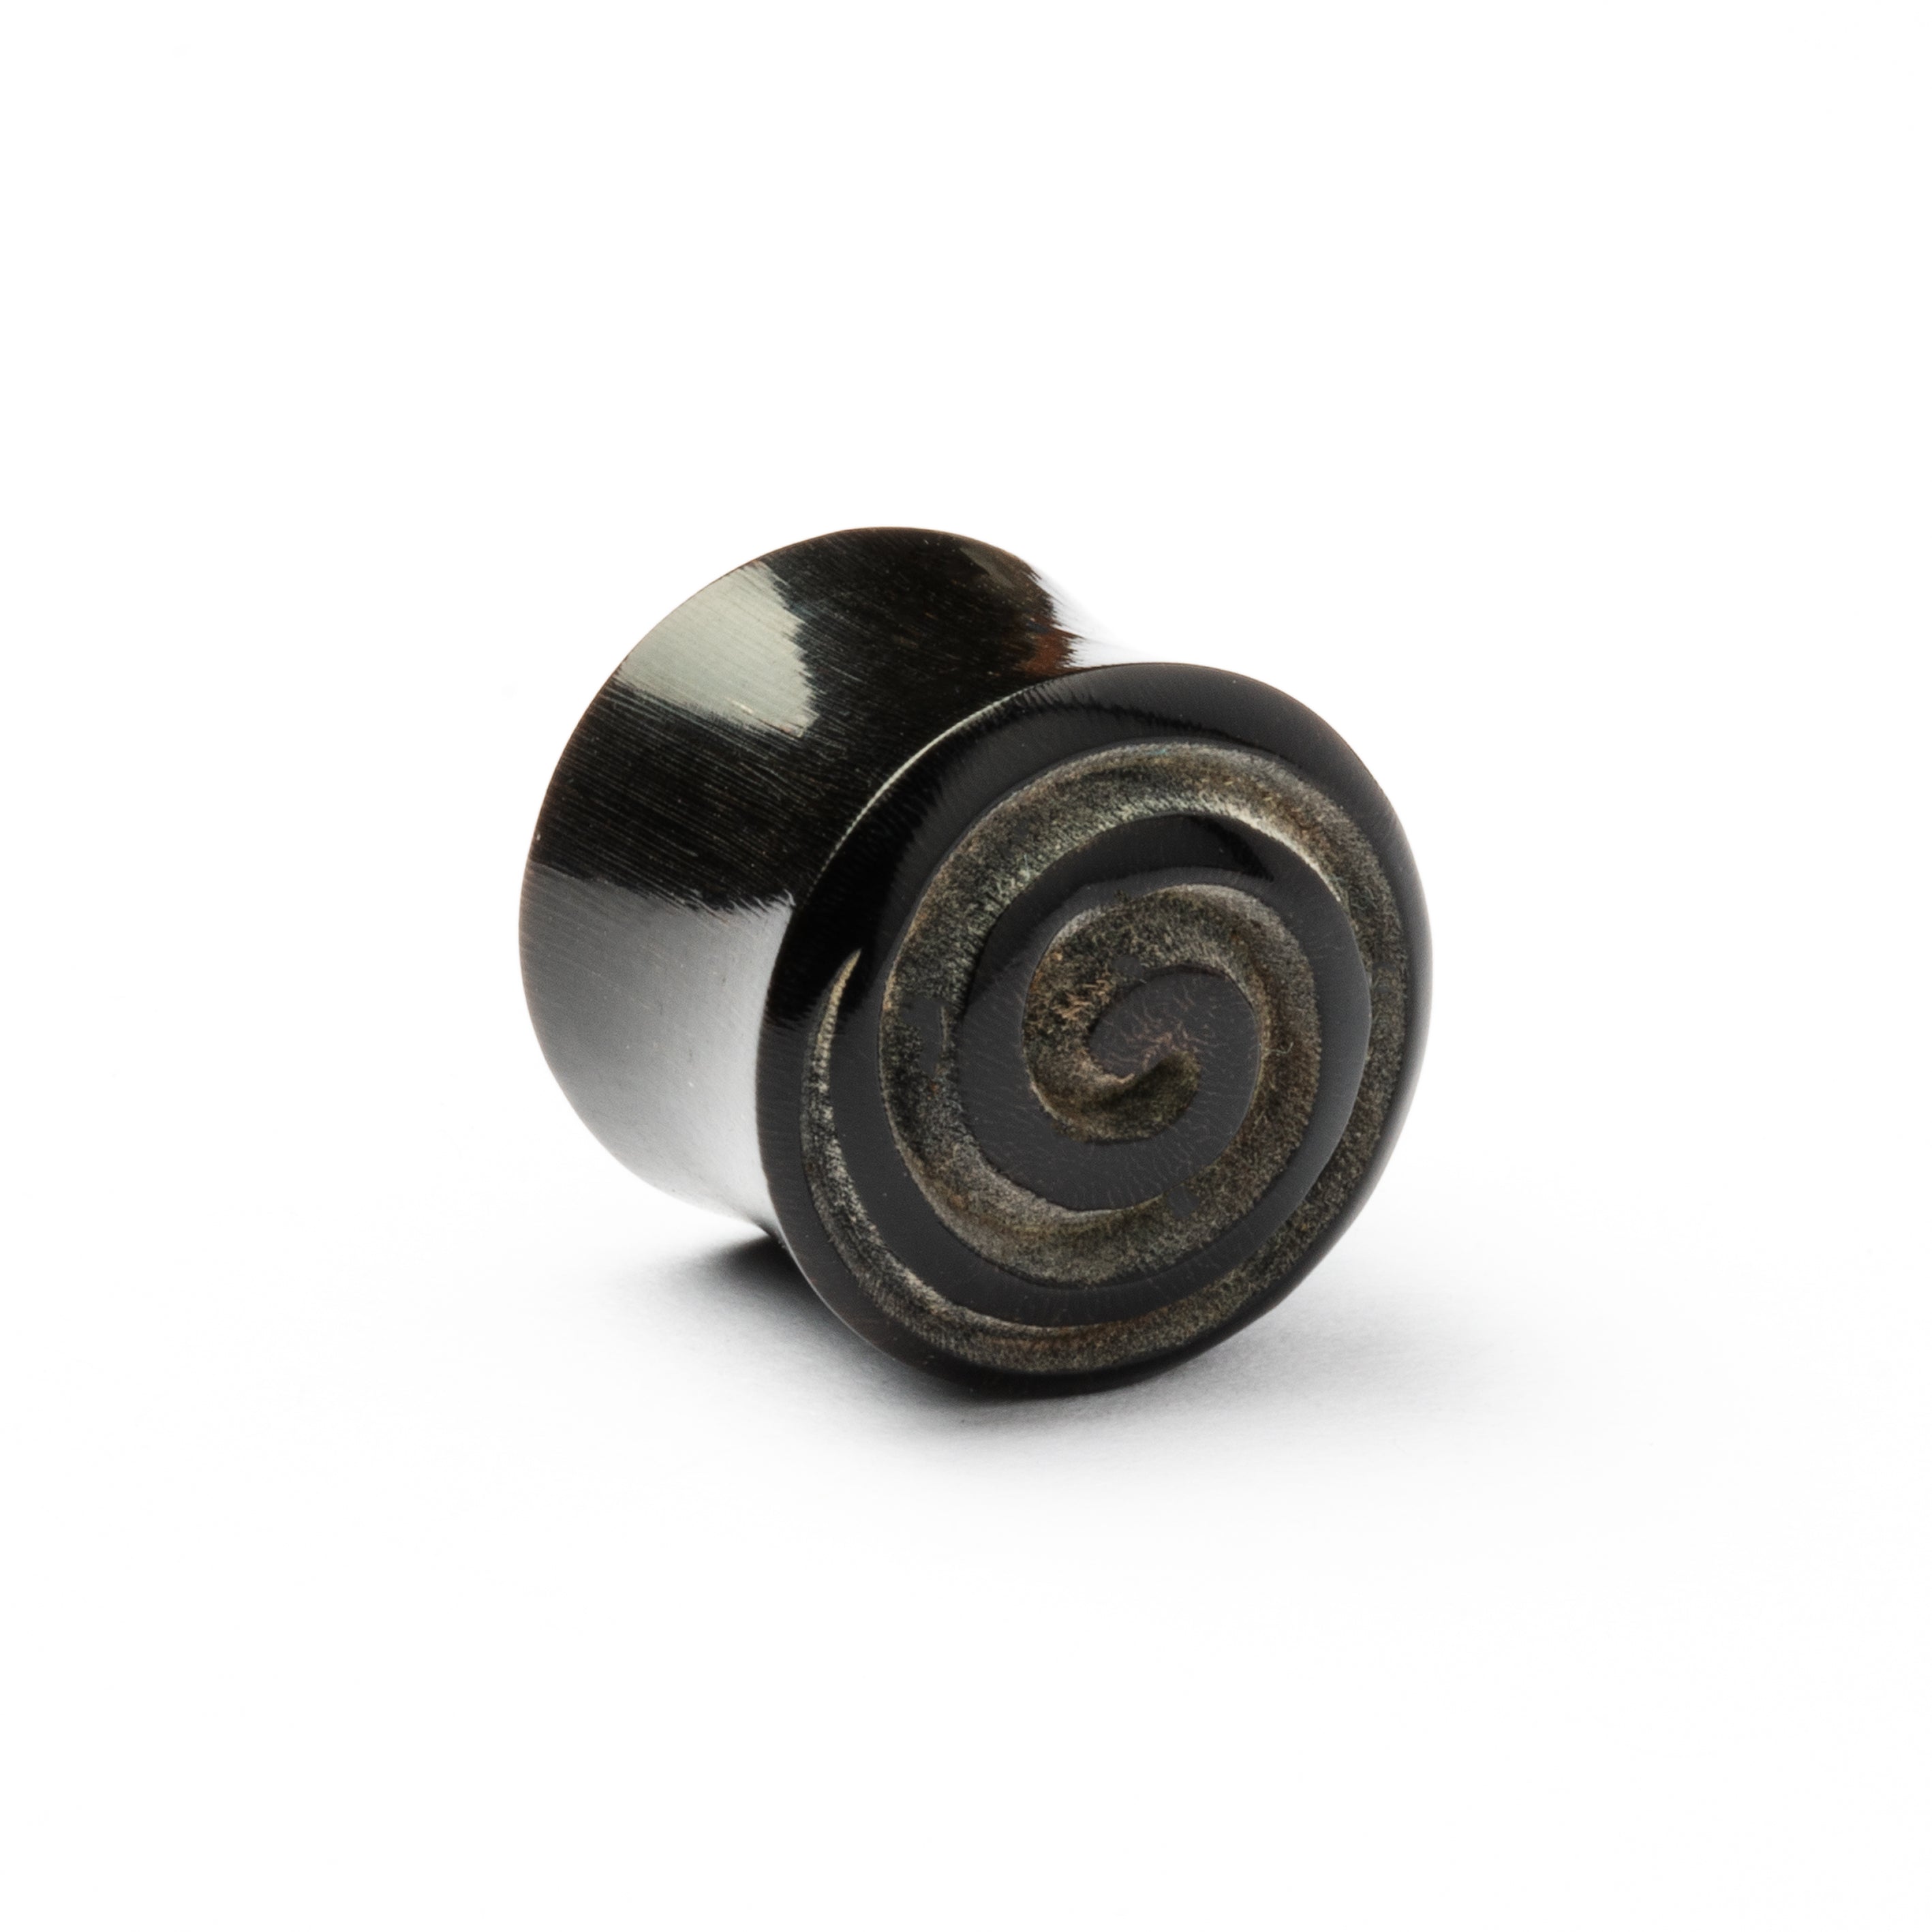 Horn Plug With Spiral Carving